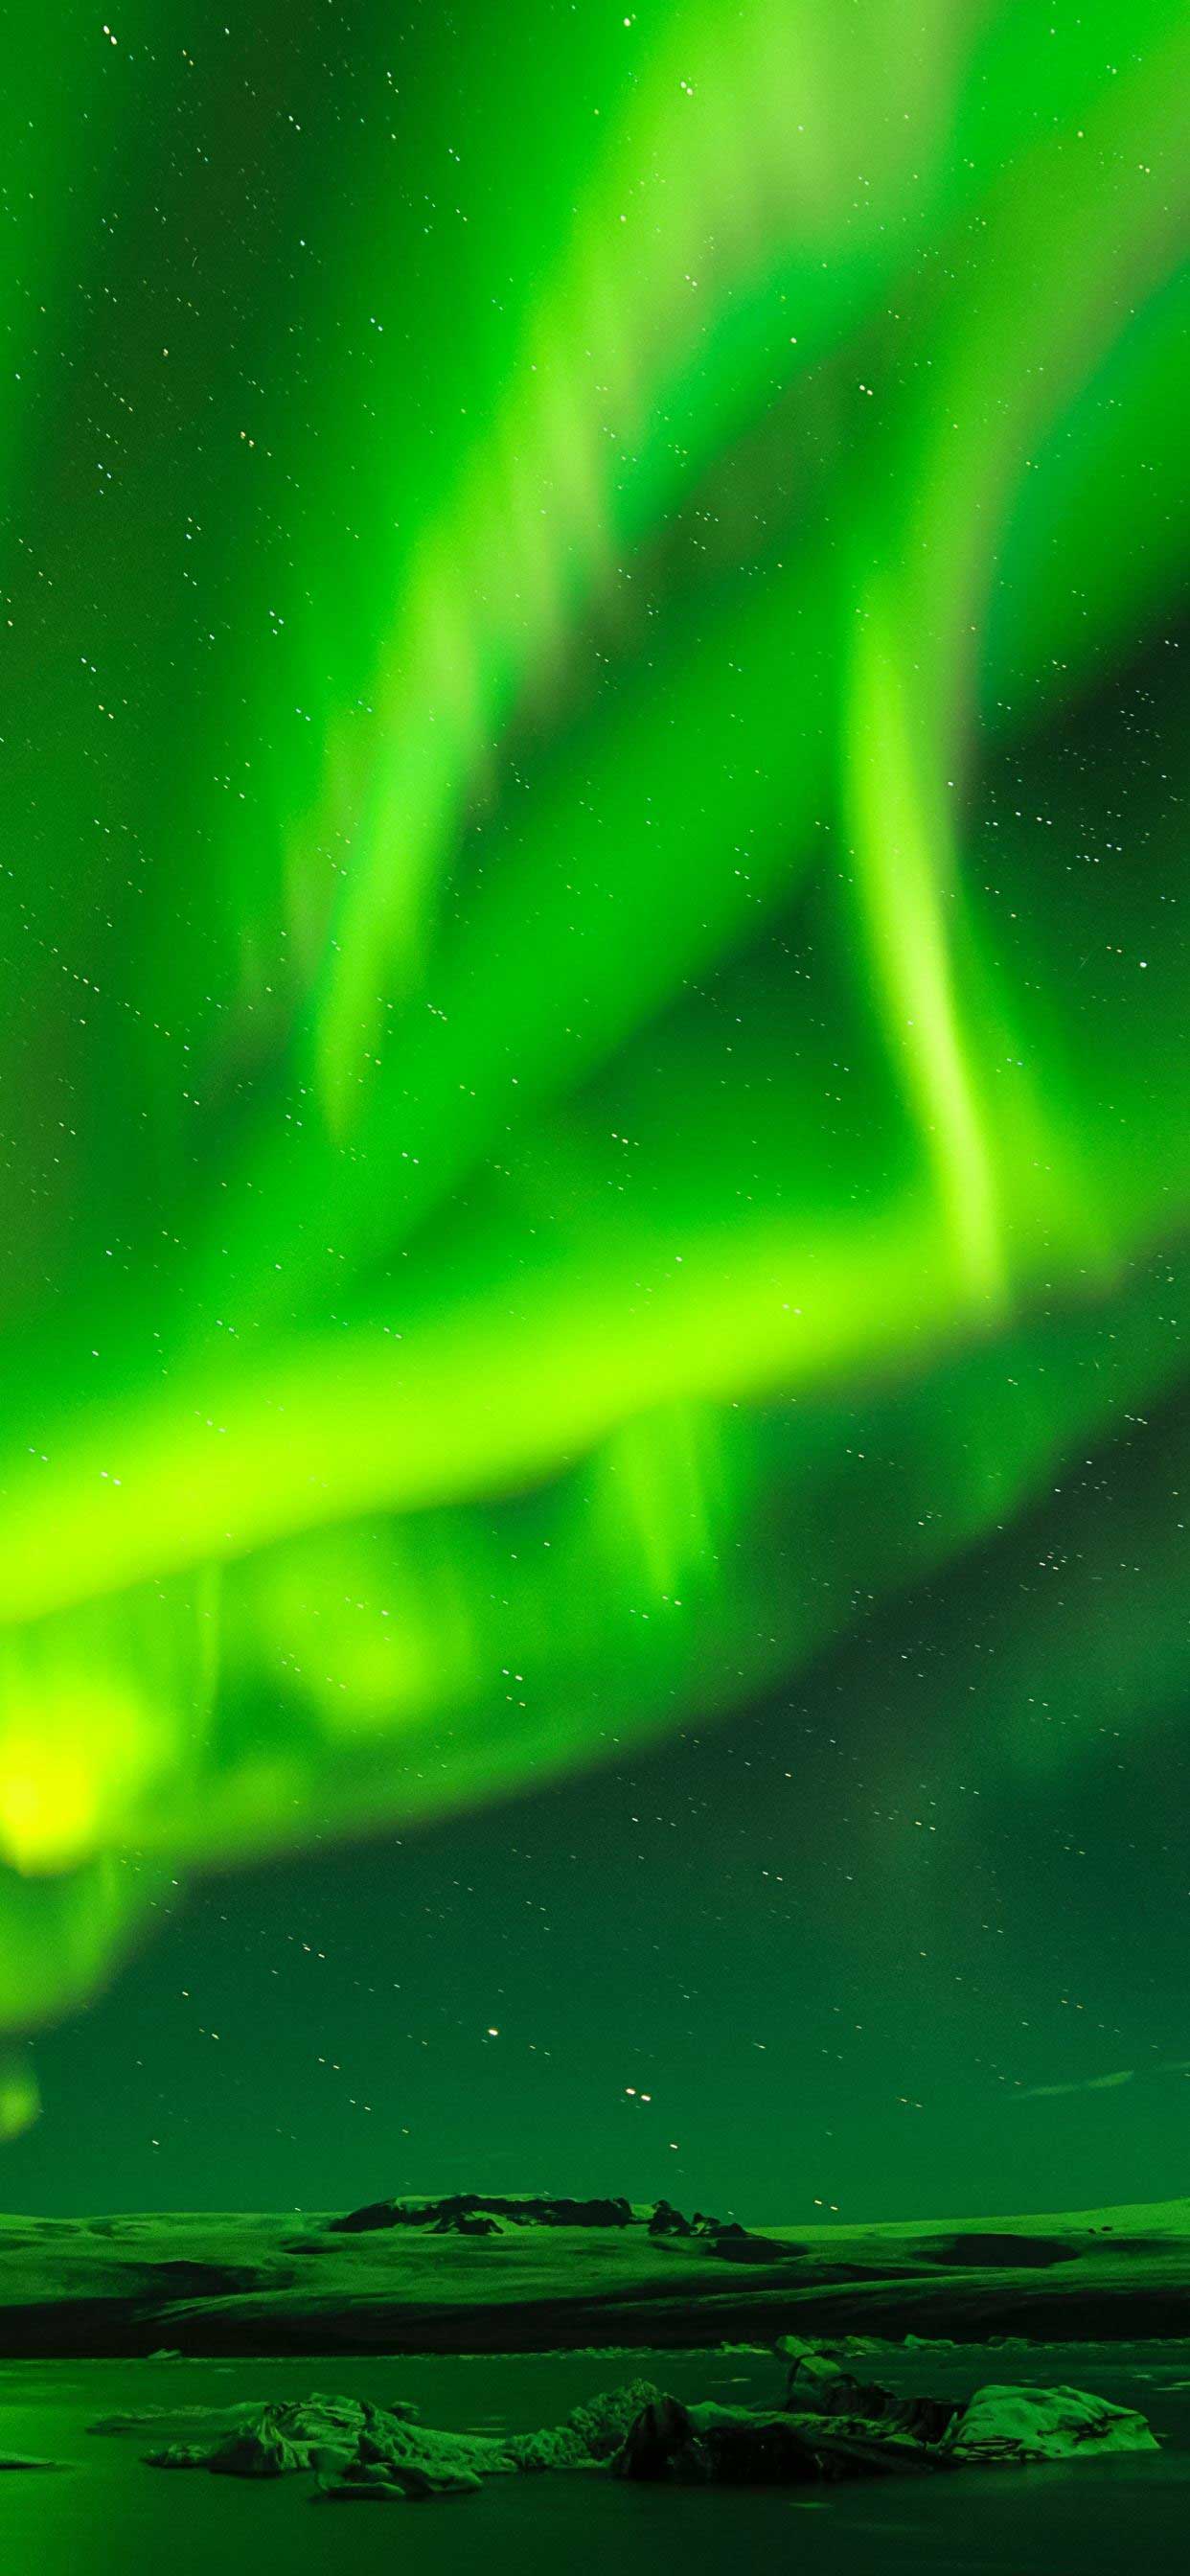 green northern lights night sky wallpaper Inspiration Ideas That You Want